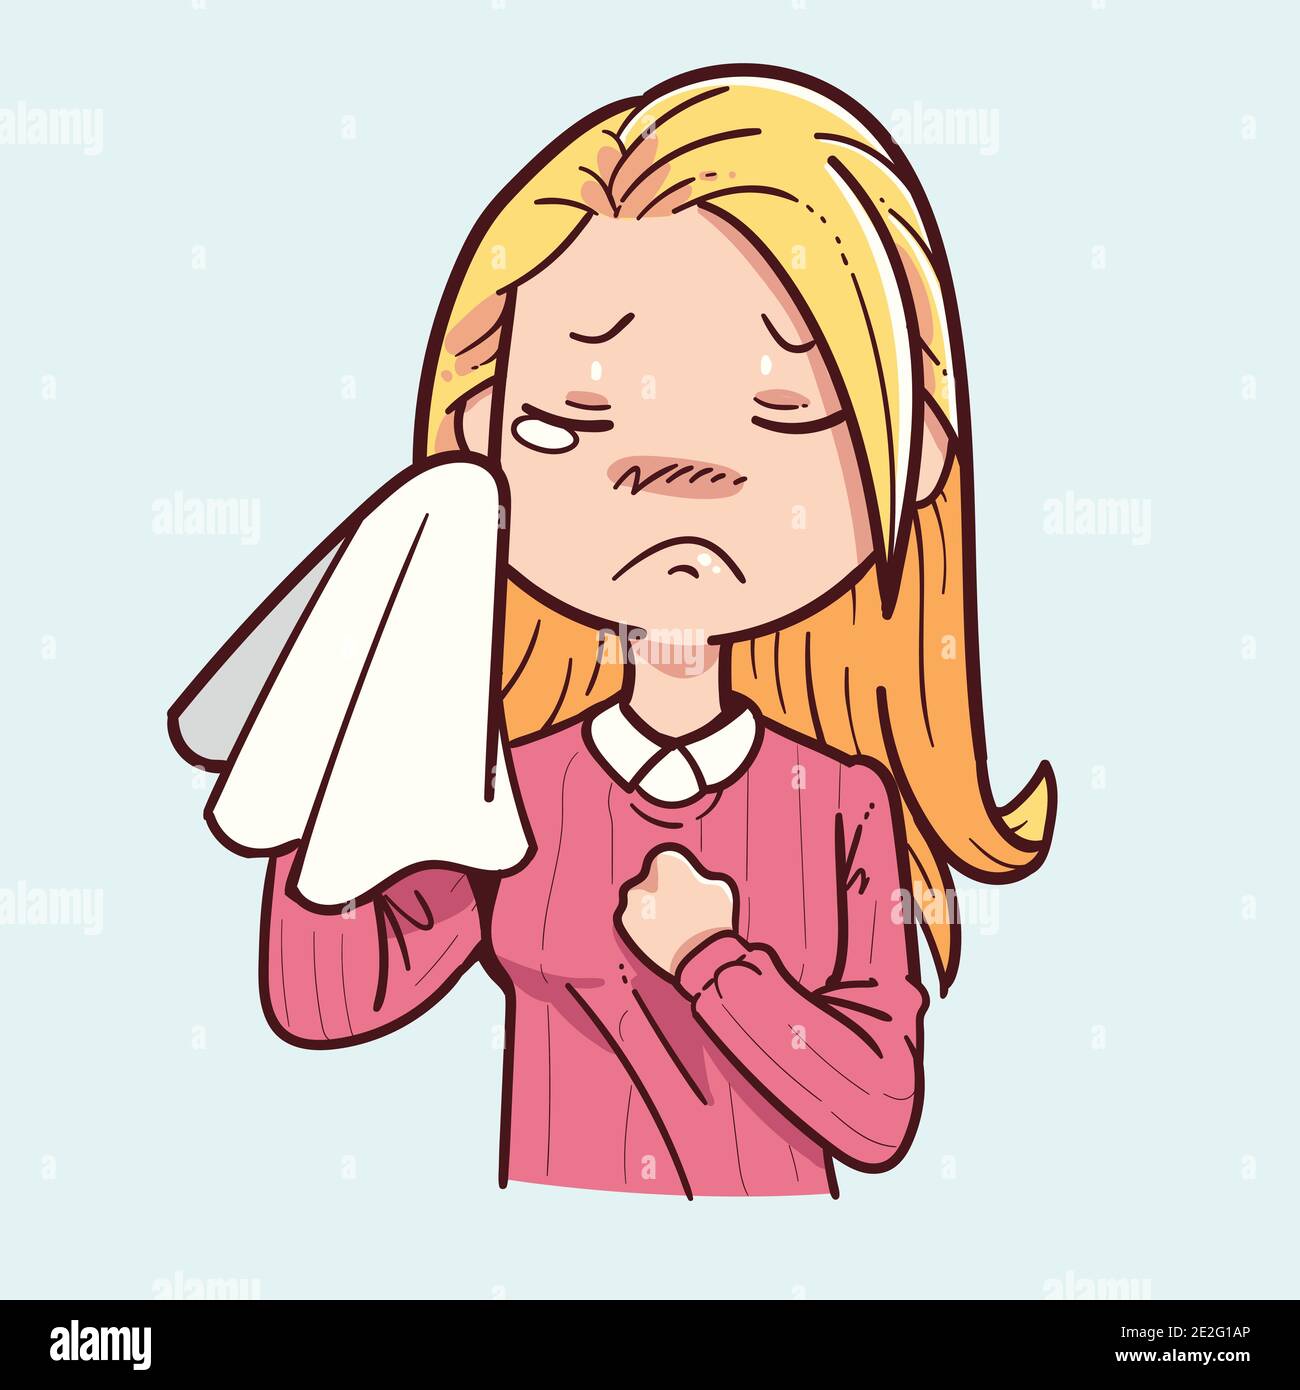 Illustration of a crying girl Stock Vector